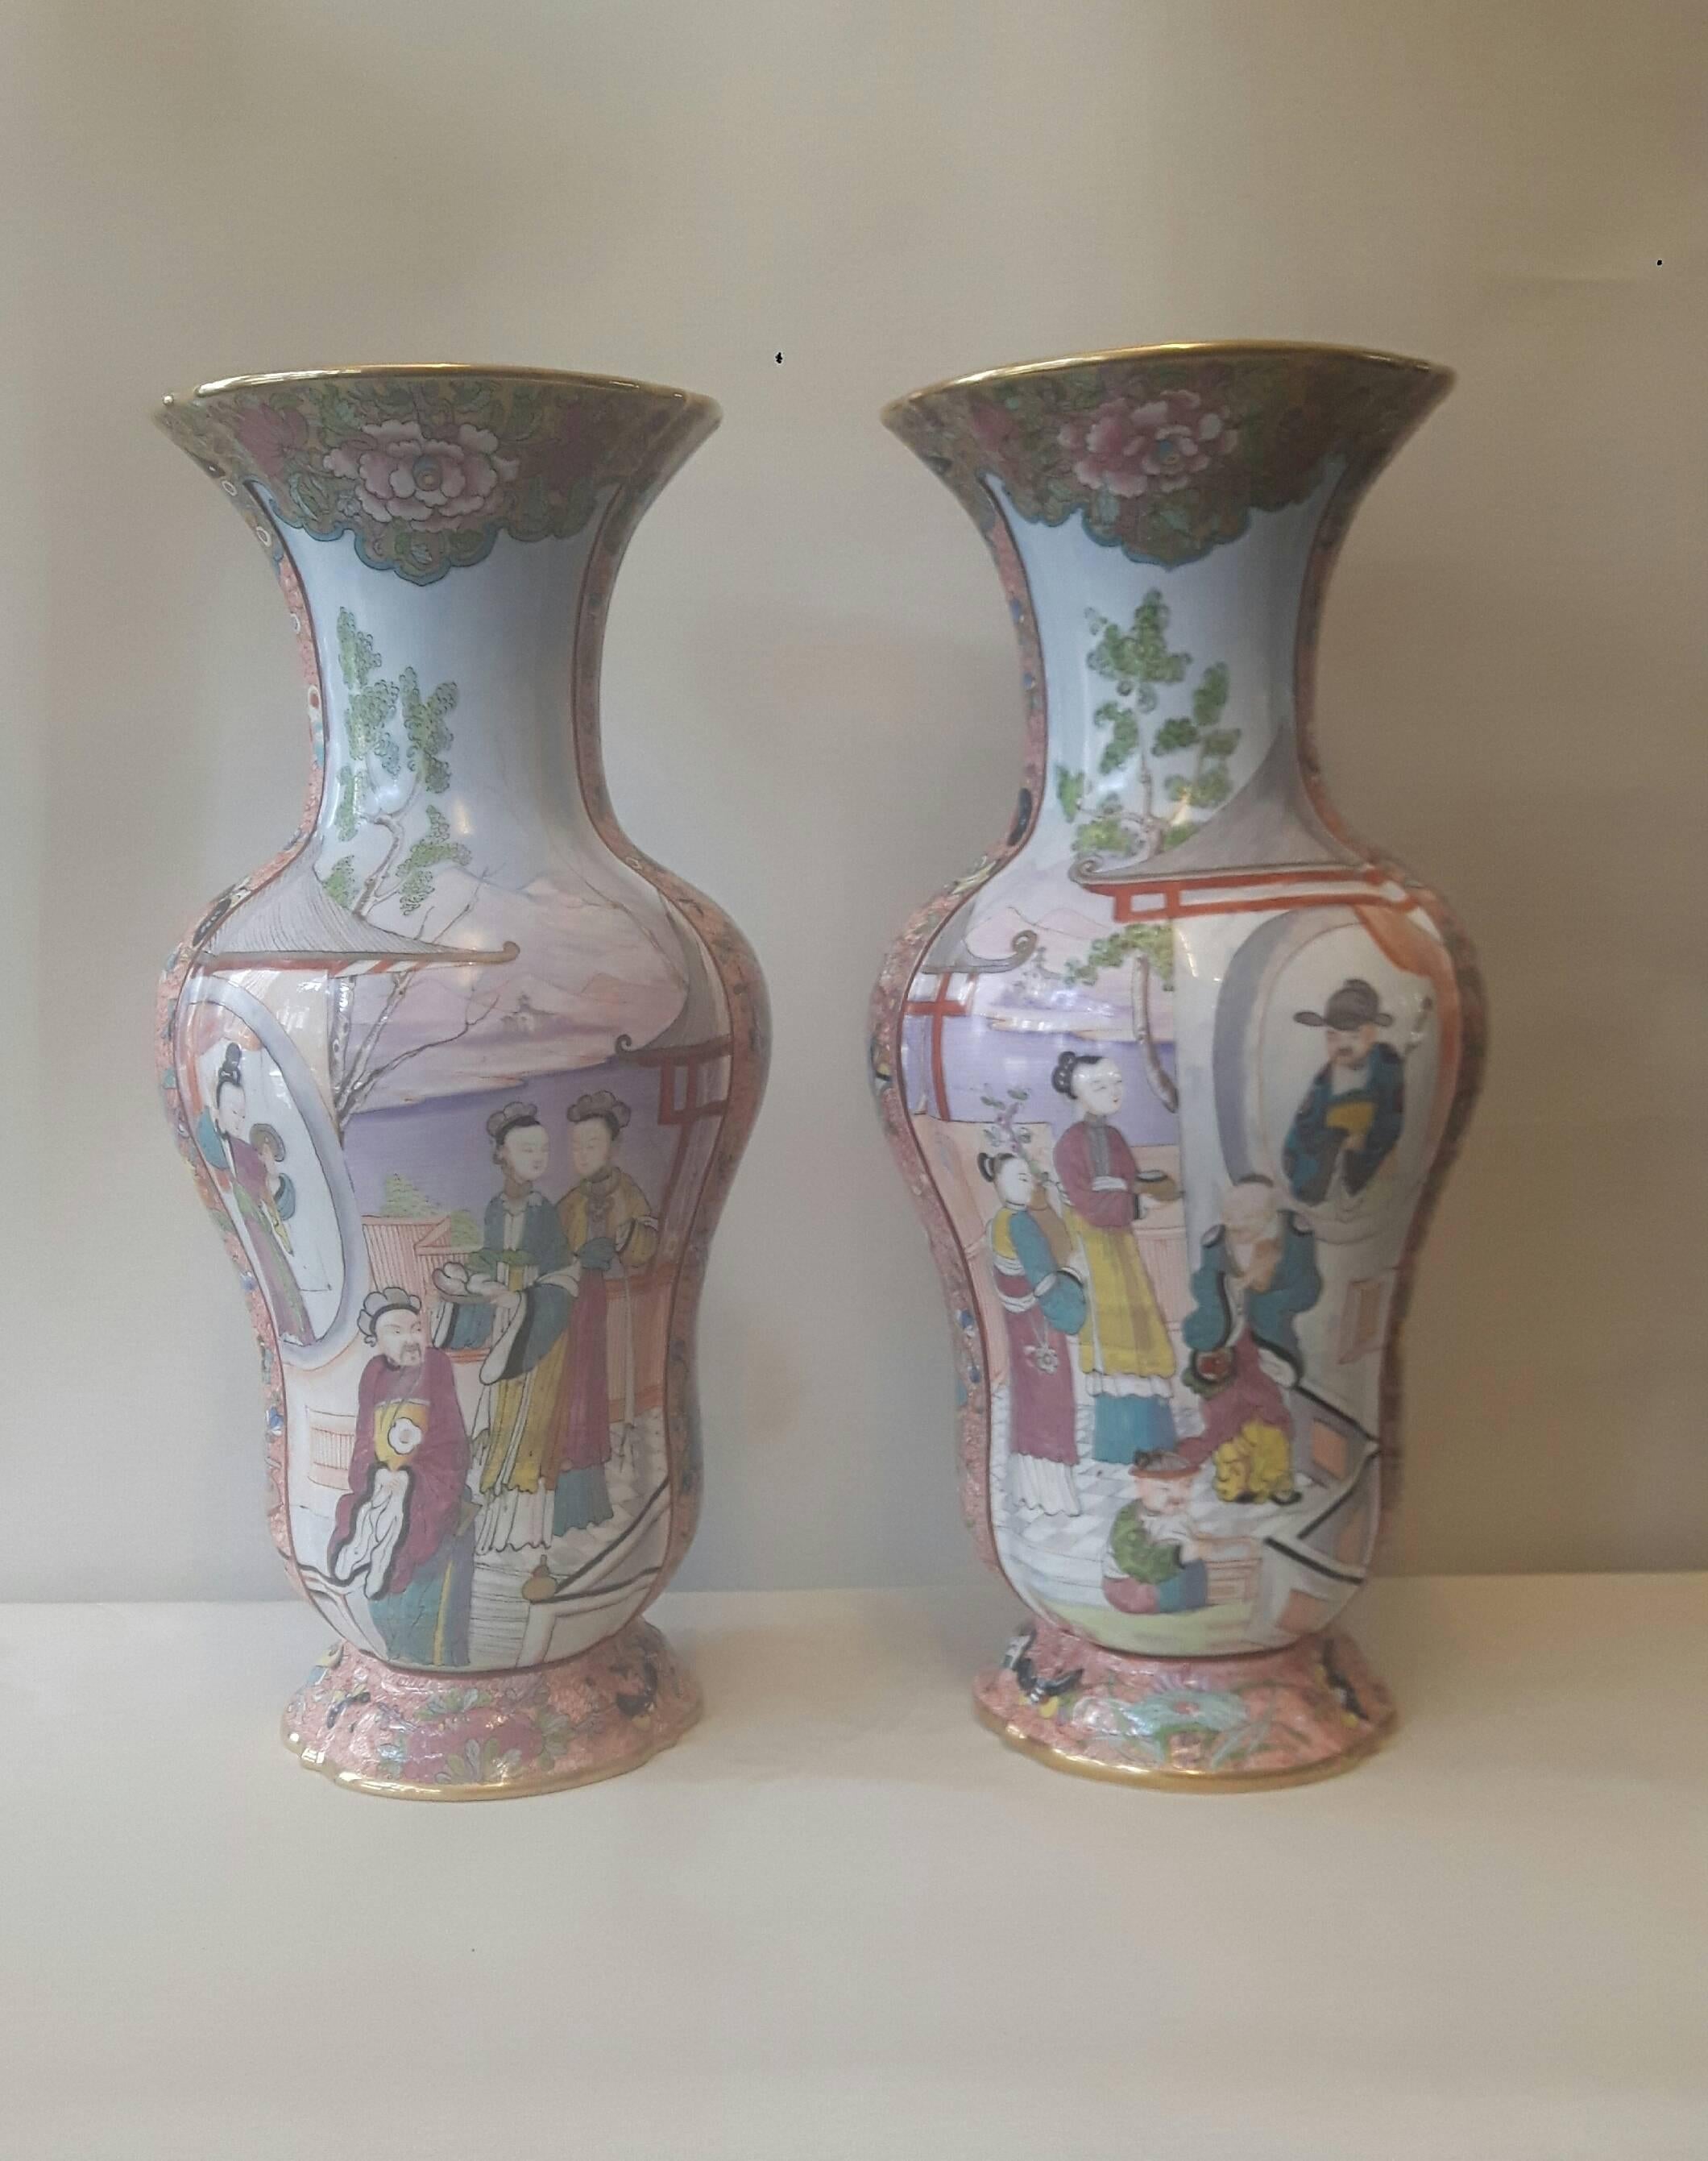 Highly Decorative Pair of 19th Century French Vases 1